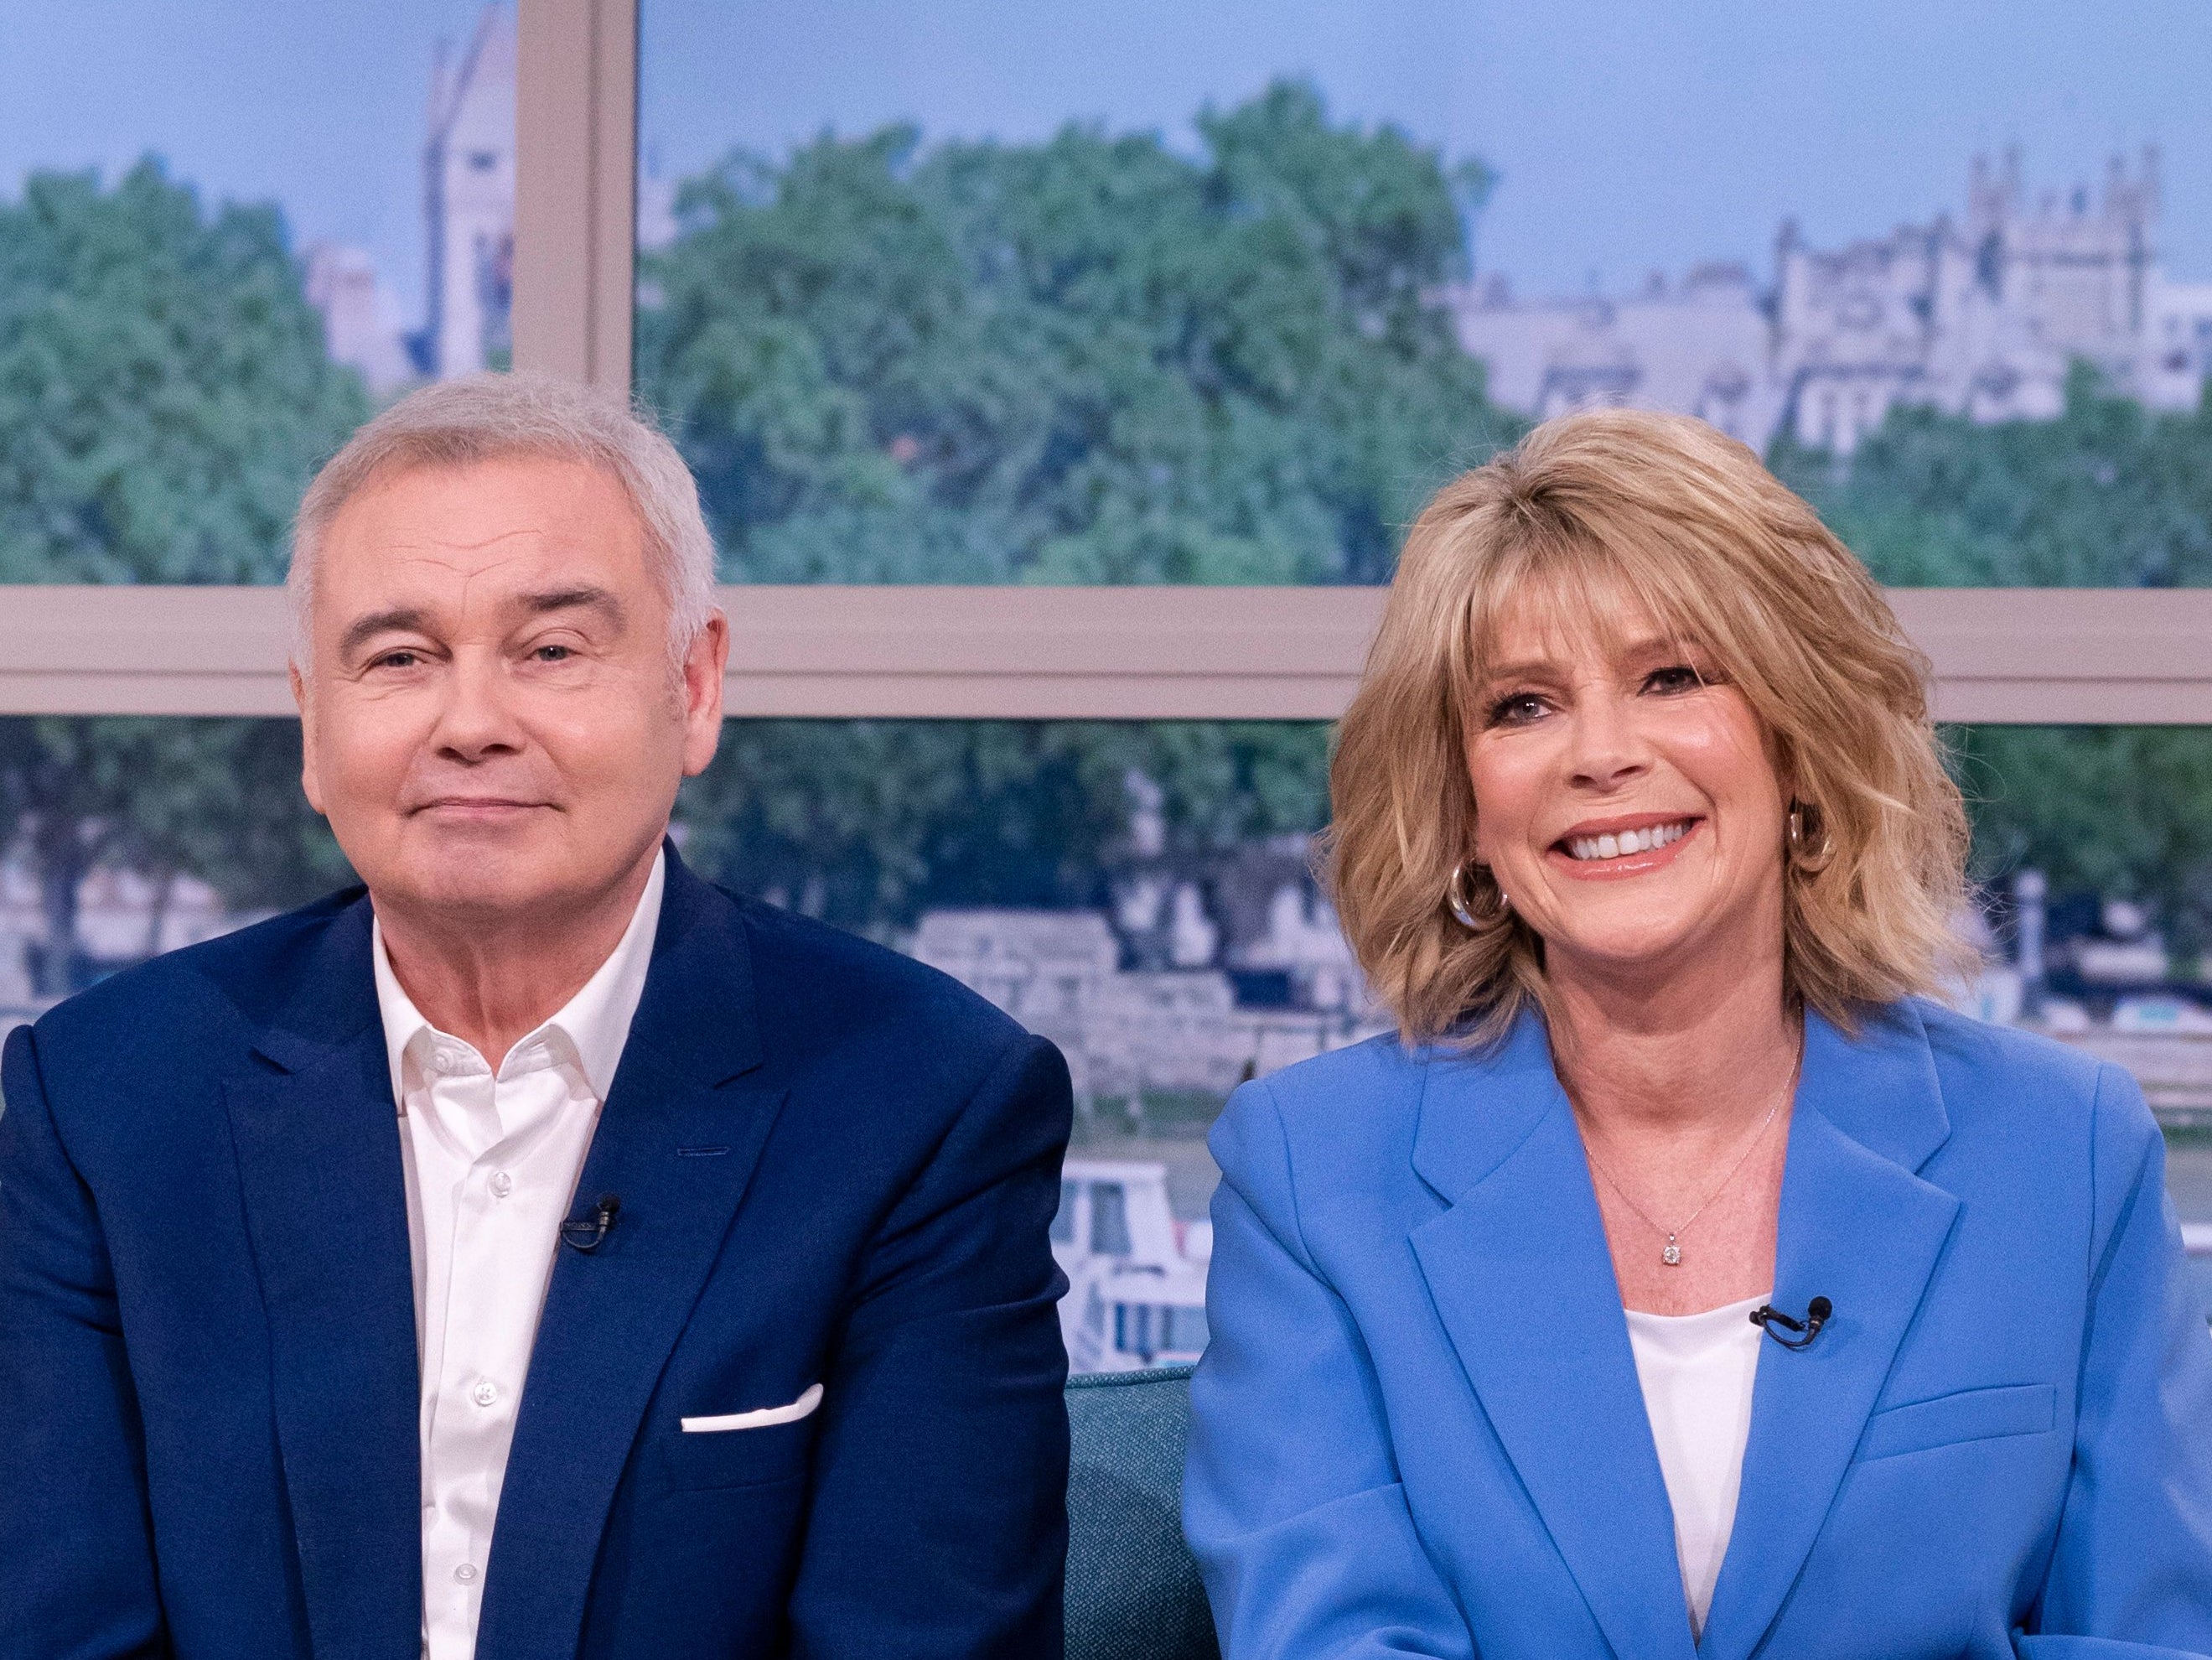 Eamonn Holmes and Ruth Langaford have hosted 'This Morning' together since 2006.